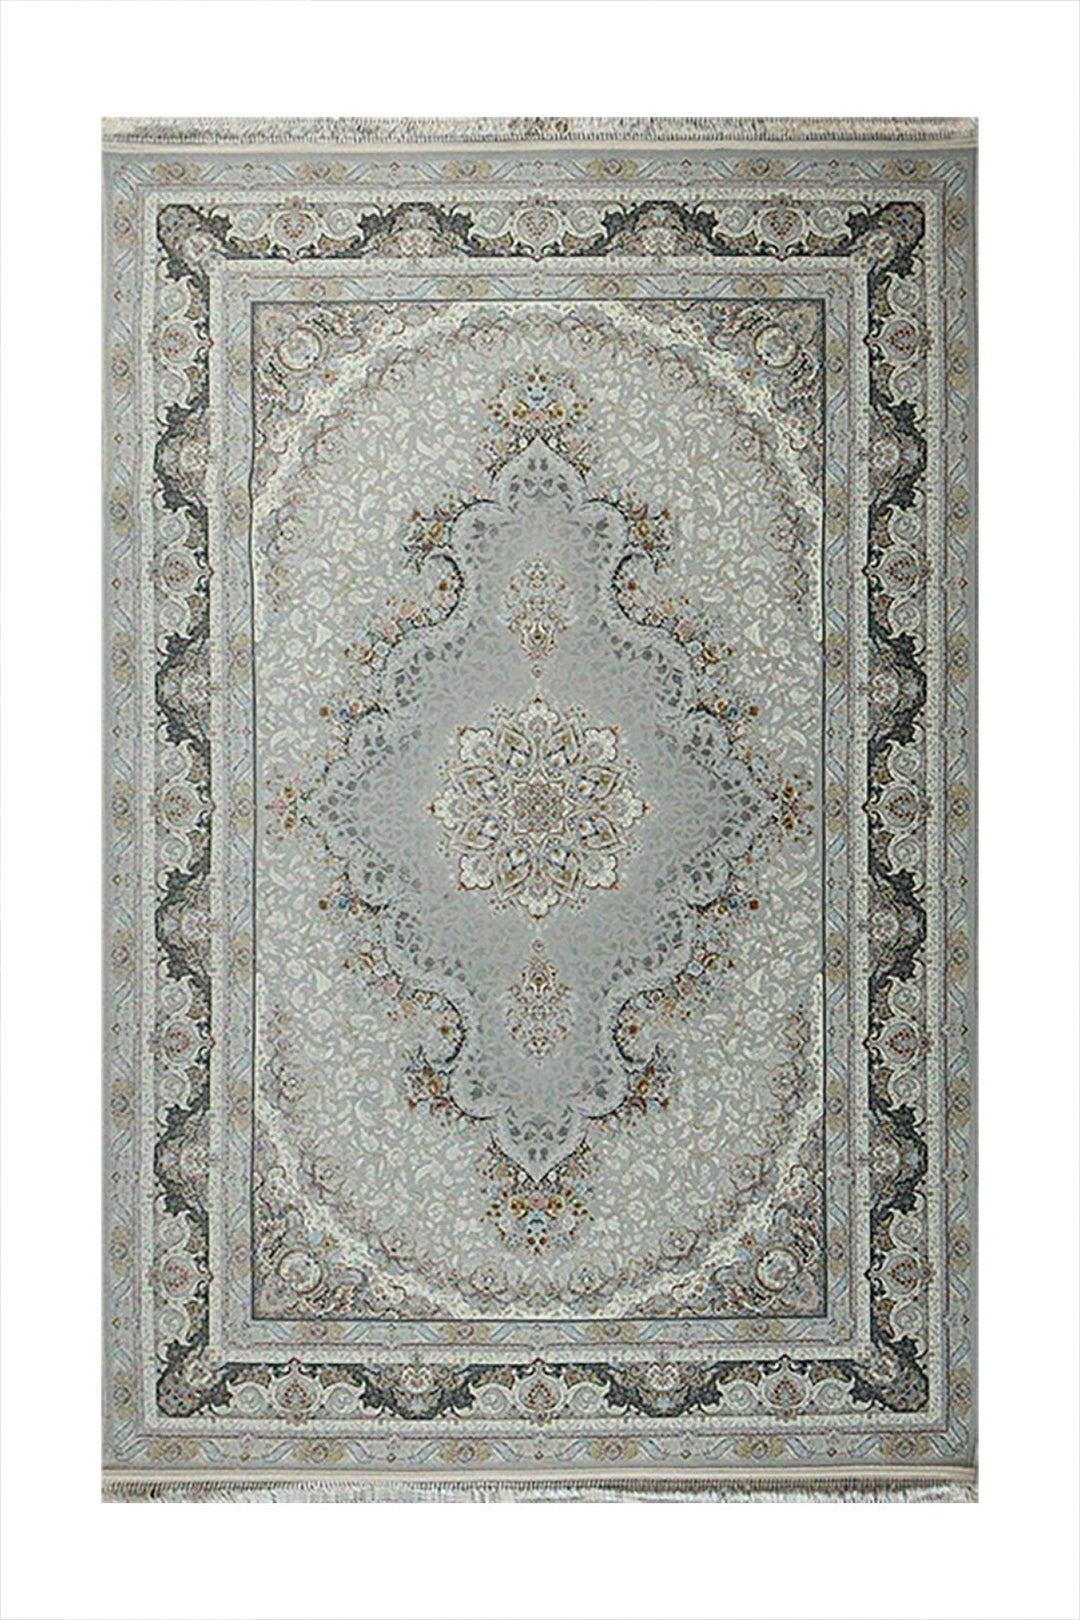 Iranian Premium Quality Authentic 1500 Rug - 4.9 x 7.3 FT - Gray - Resilient Construction for Long-Lasting Use - V Surfaces